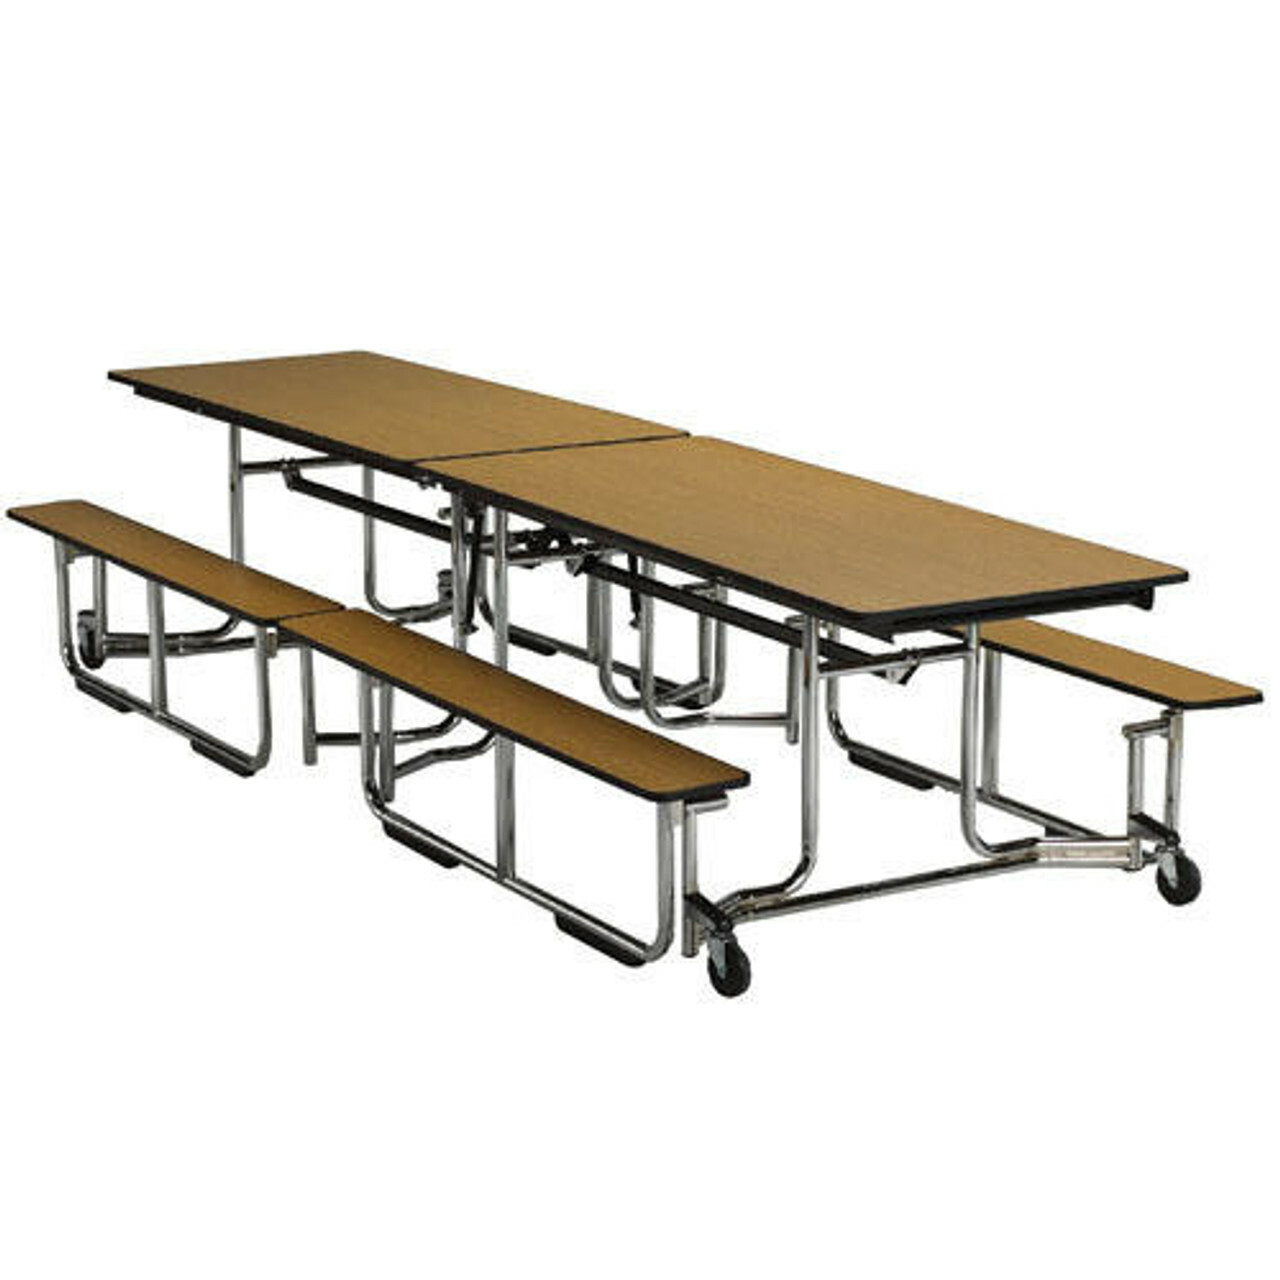 Bench Seating Cafeteria Tables